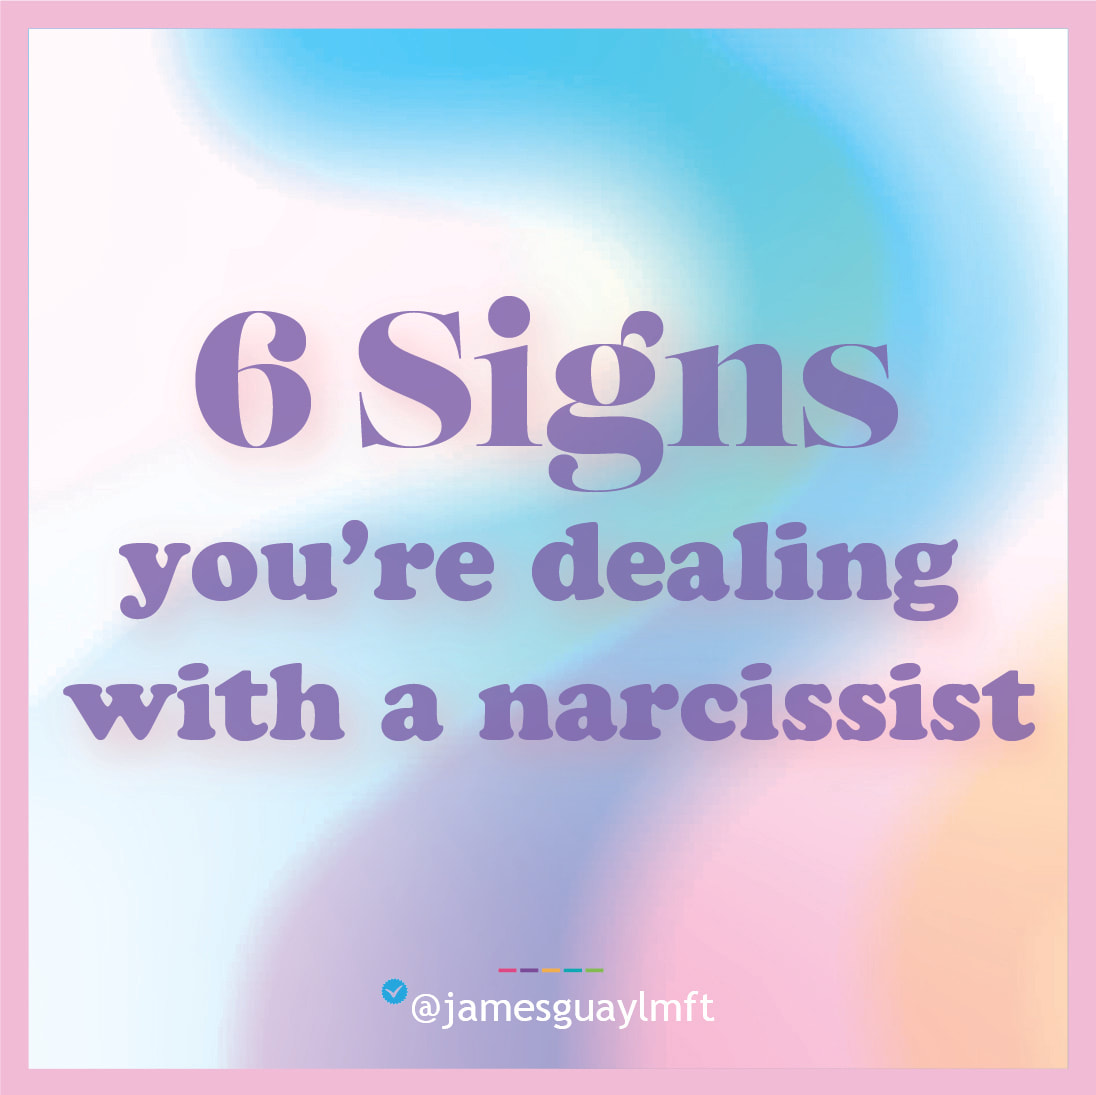 6 signs you're dealing with a narcissist